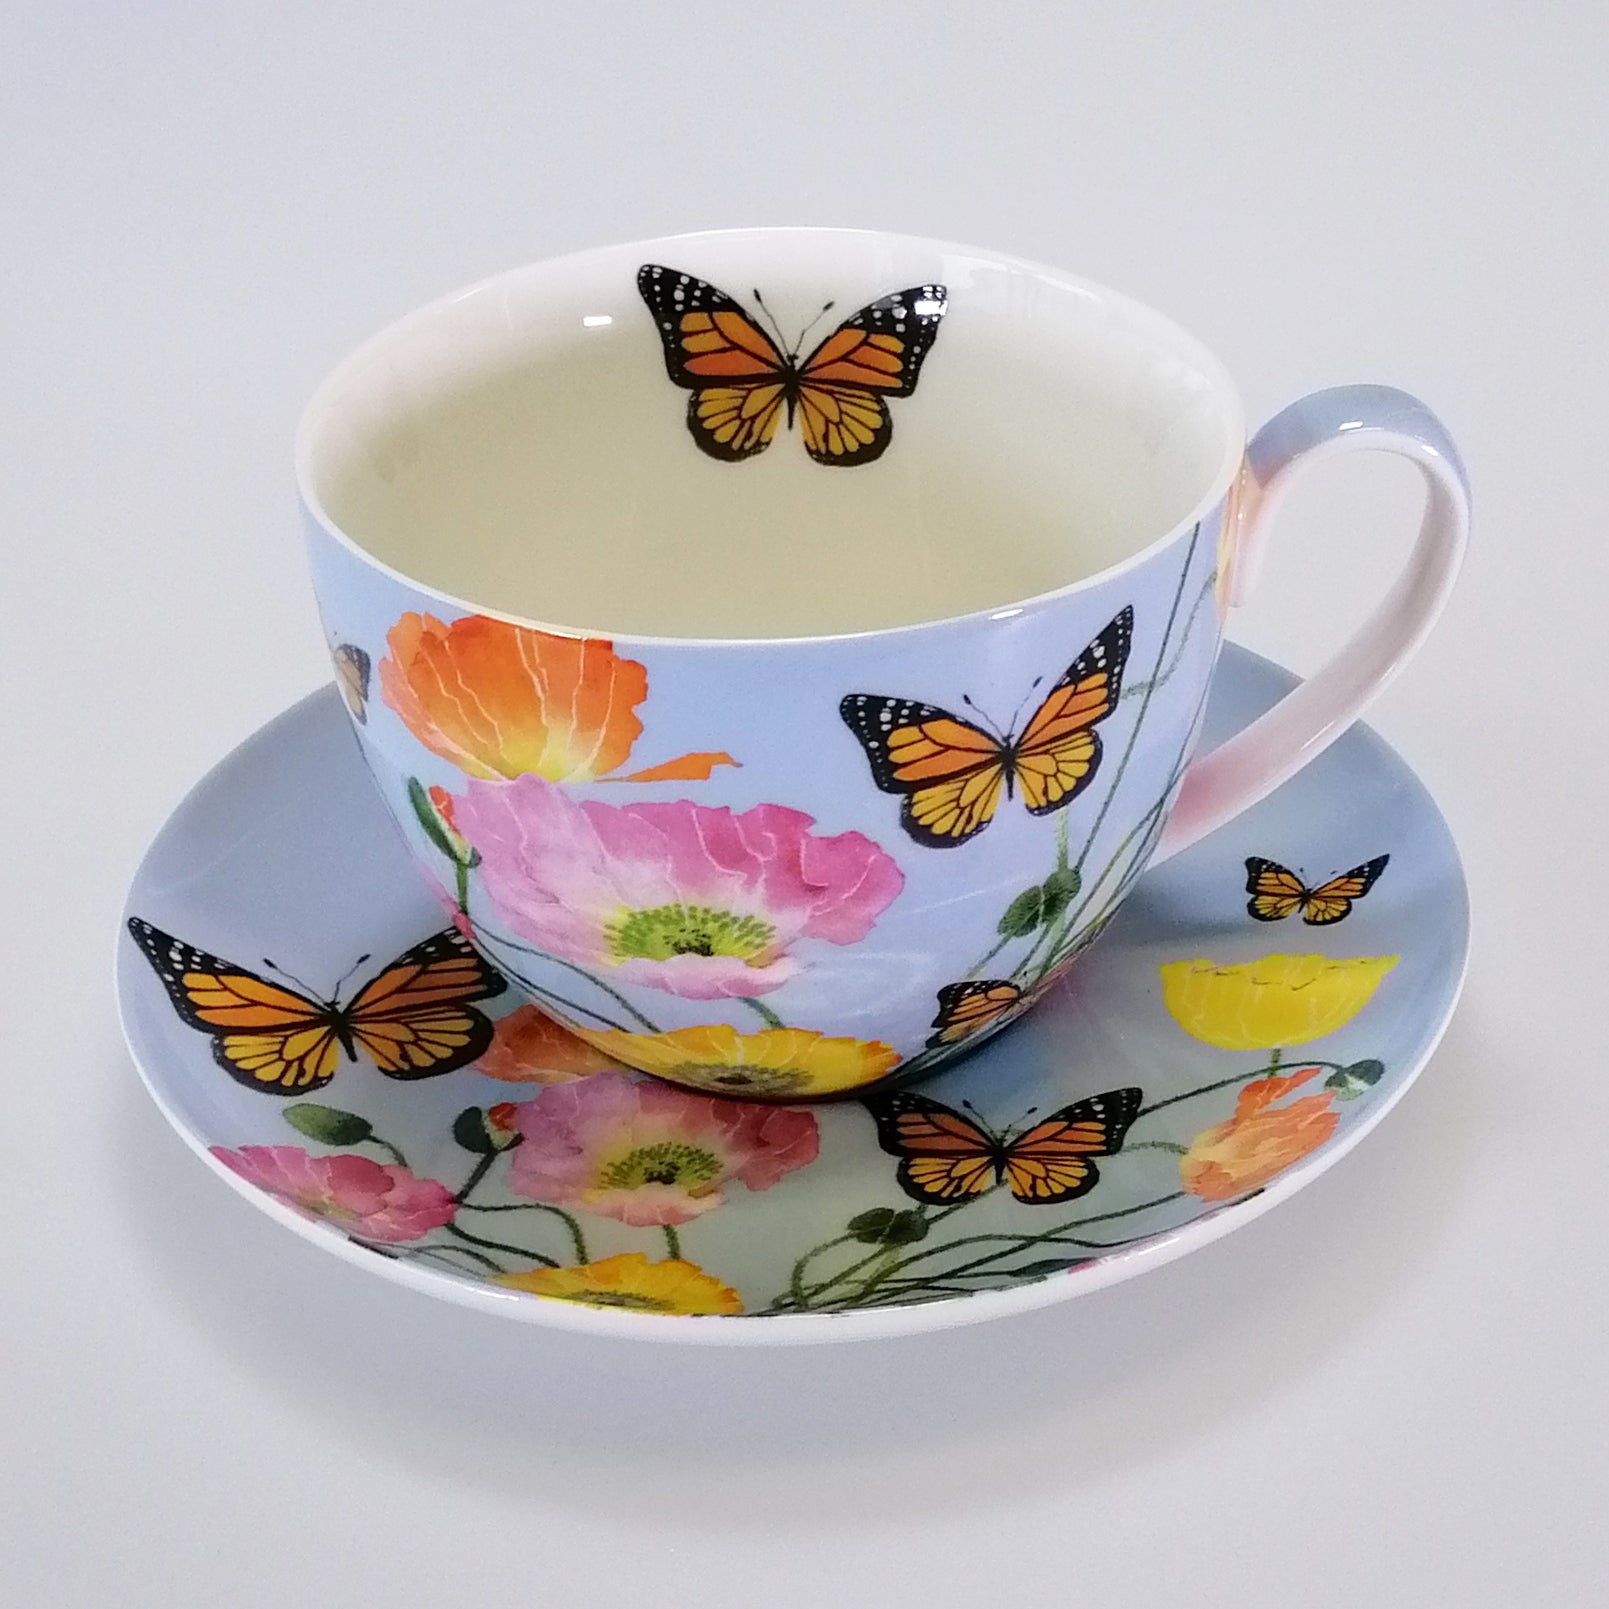 Posey Breakfast Cup & Saucer - Poppies